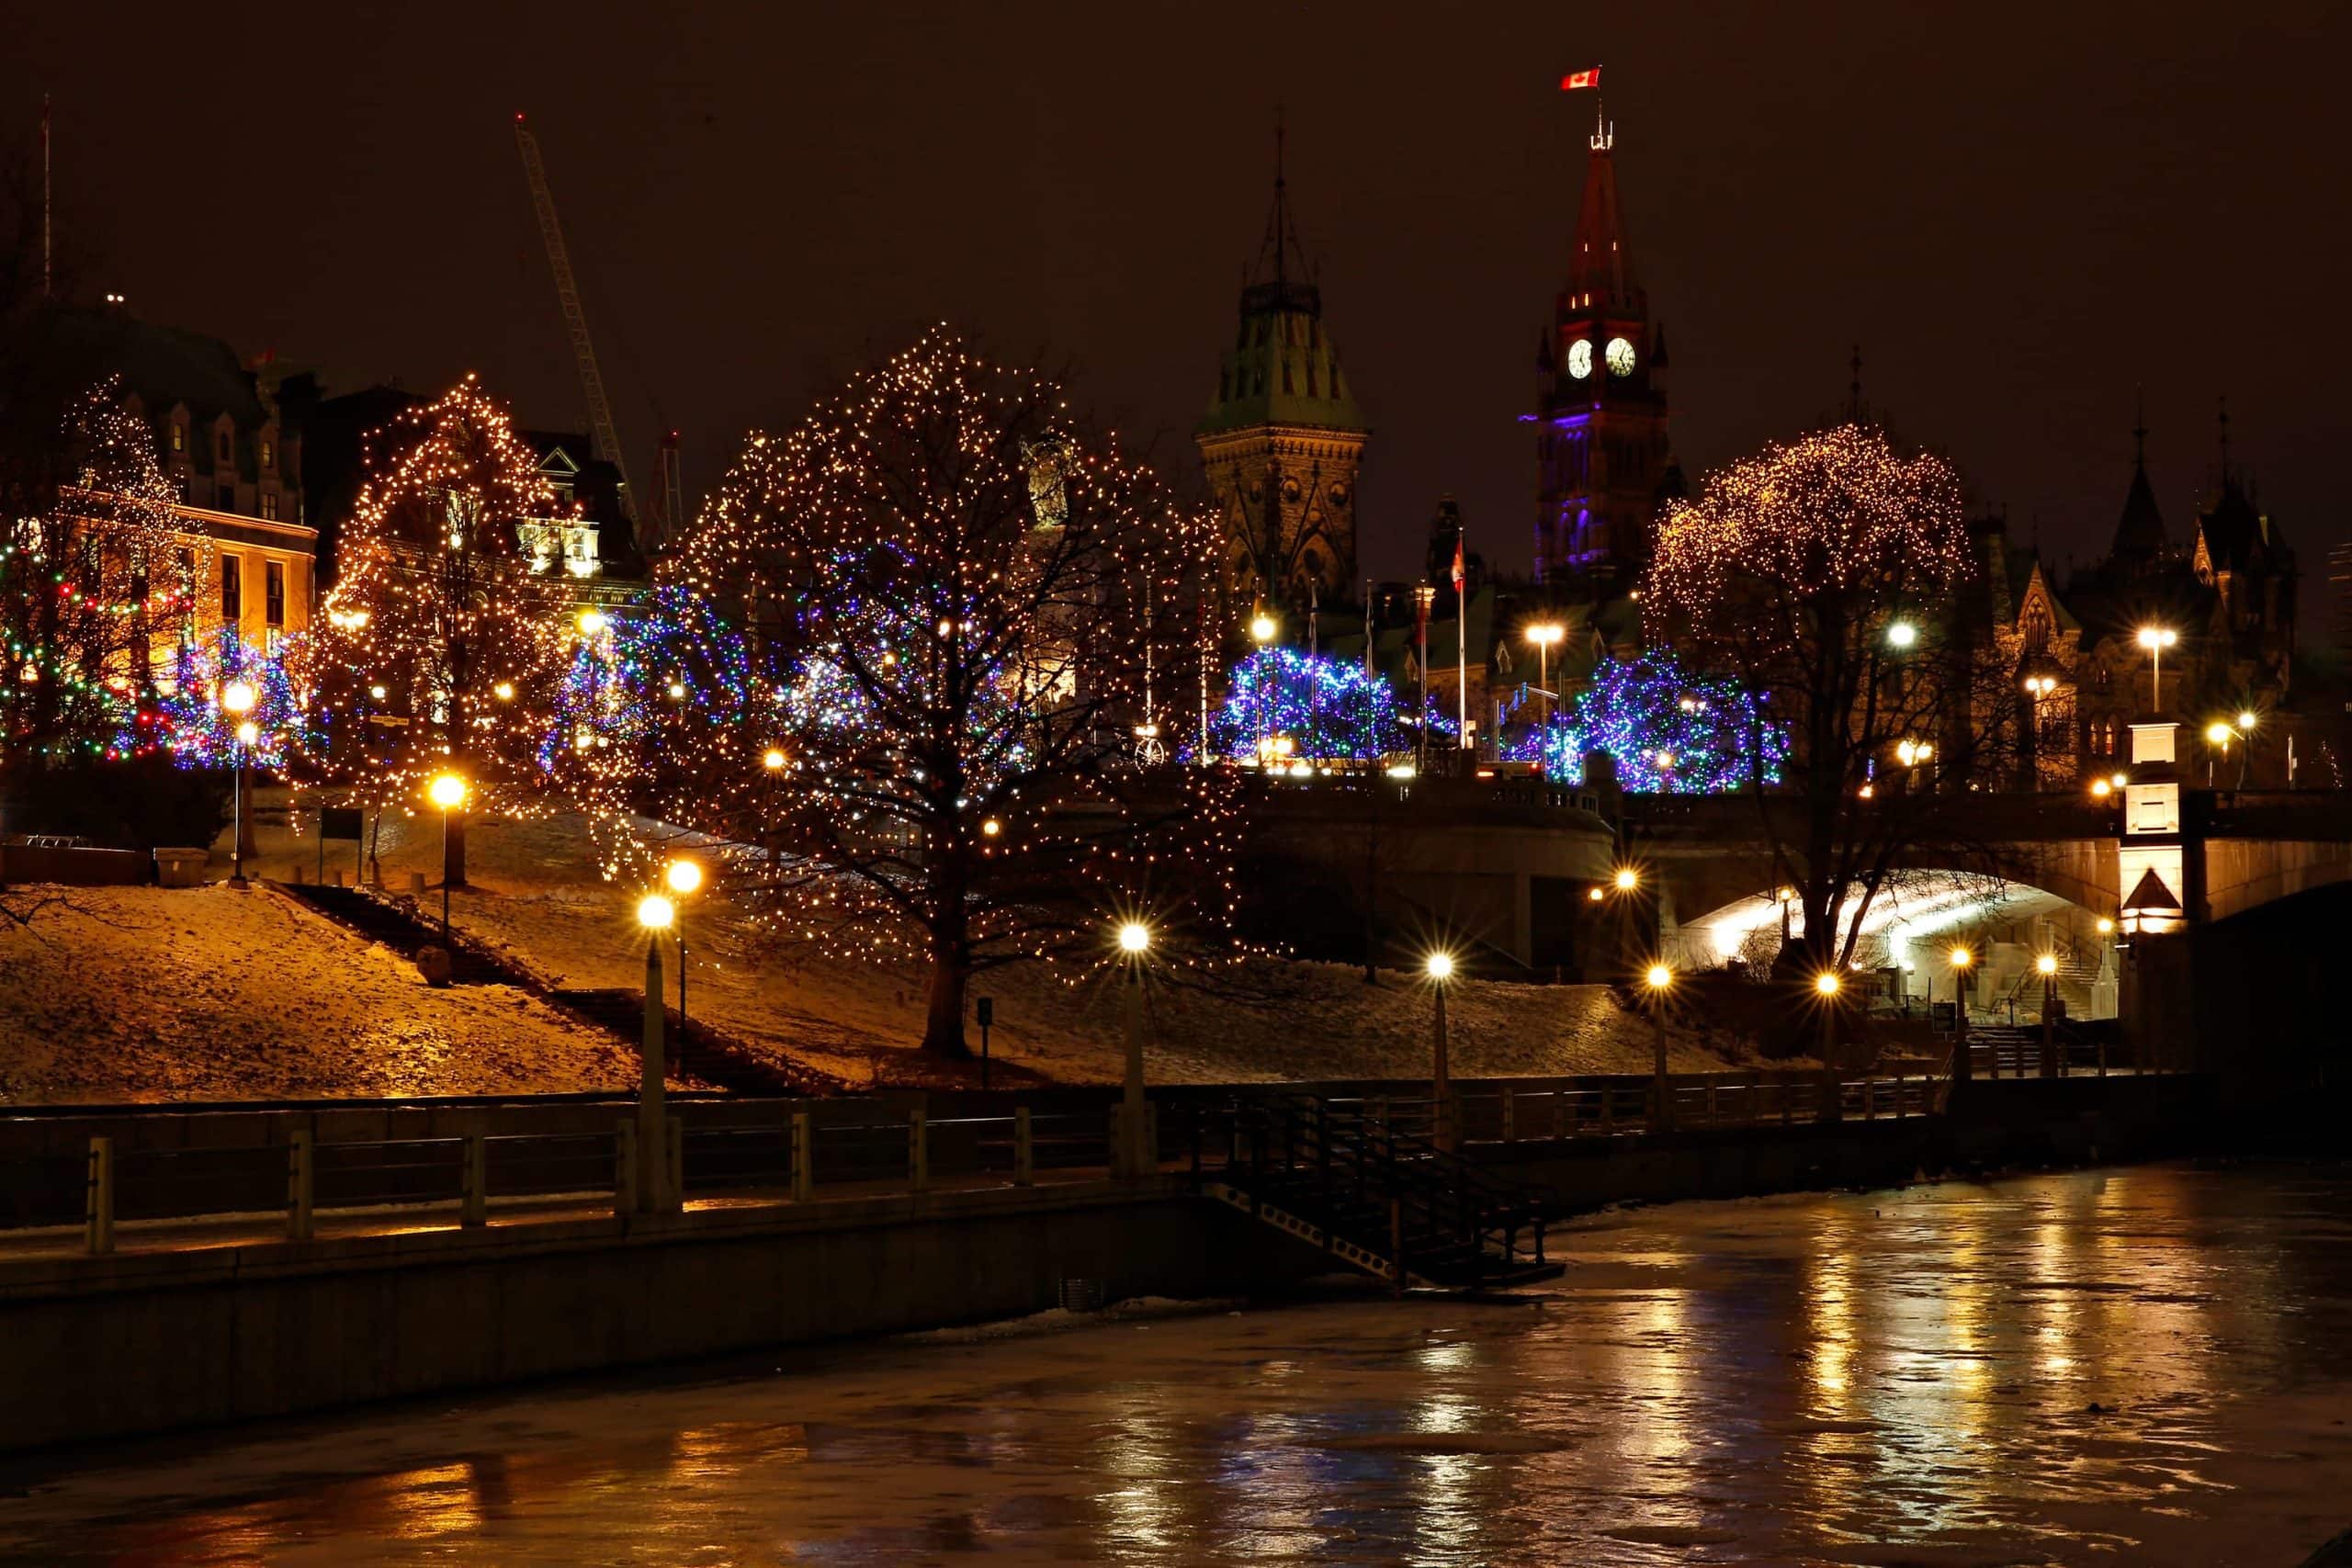 Christmas lights in downtown Ottawa, Canal. December 9, 2014. Photo by Blair Gable